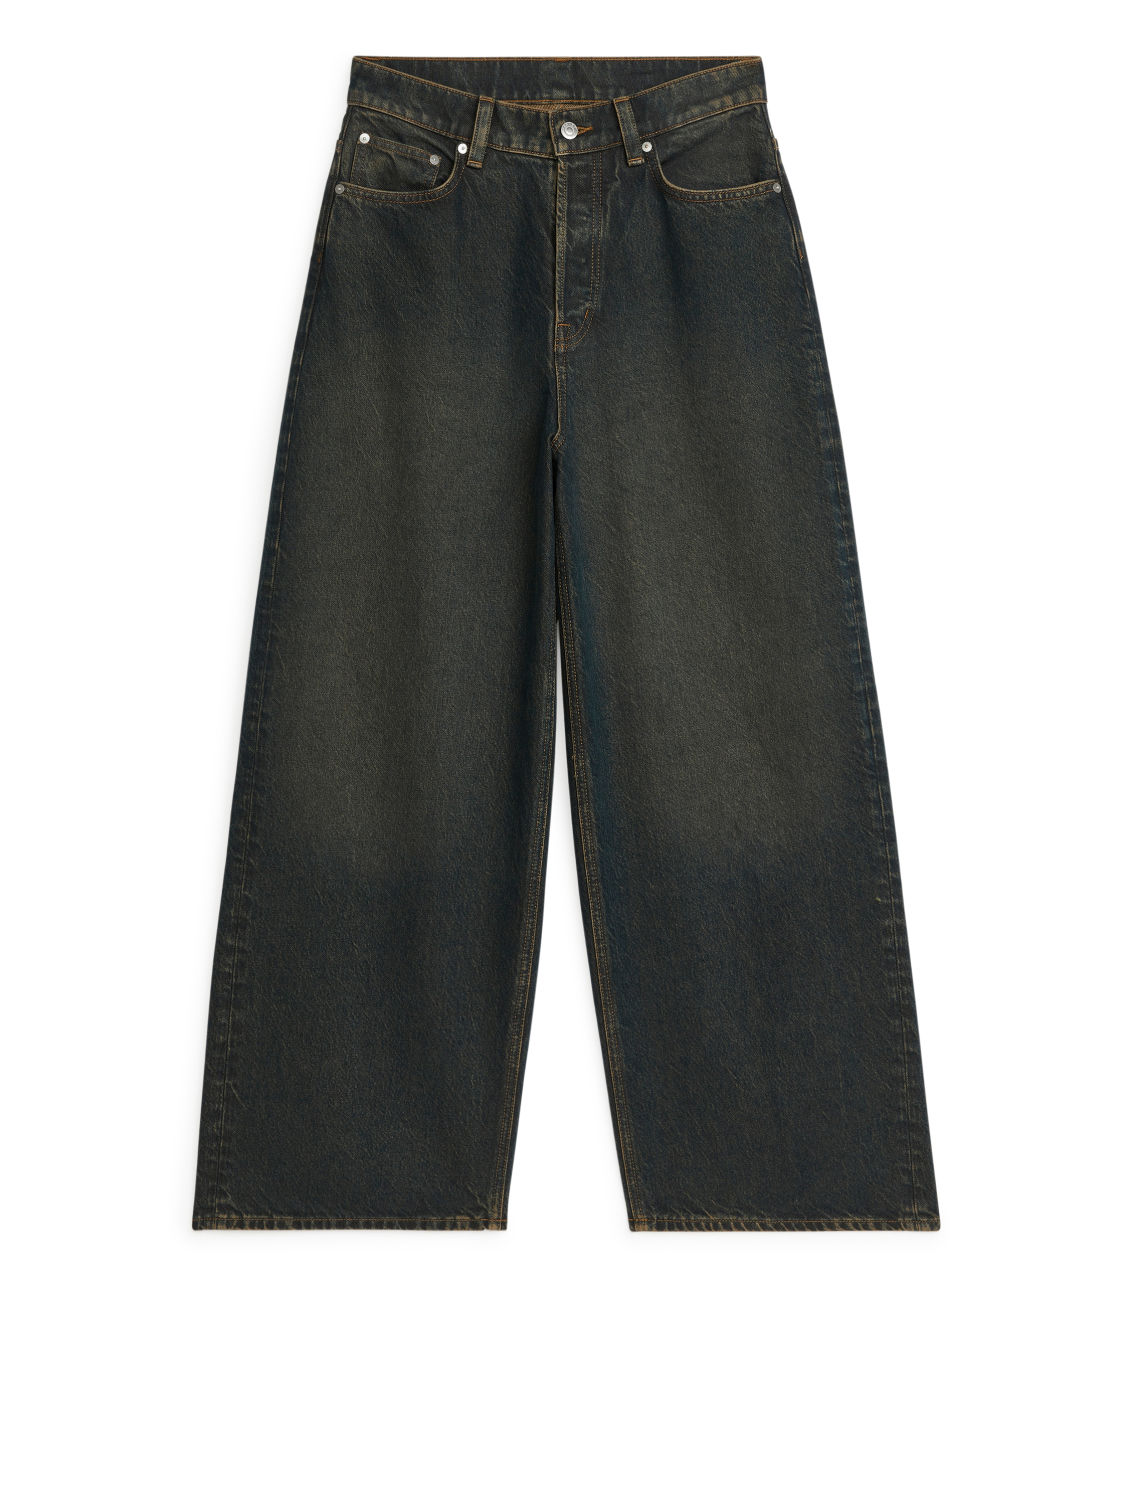 Arket + Tulsi Relaxed Jeans